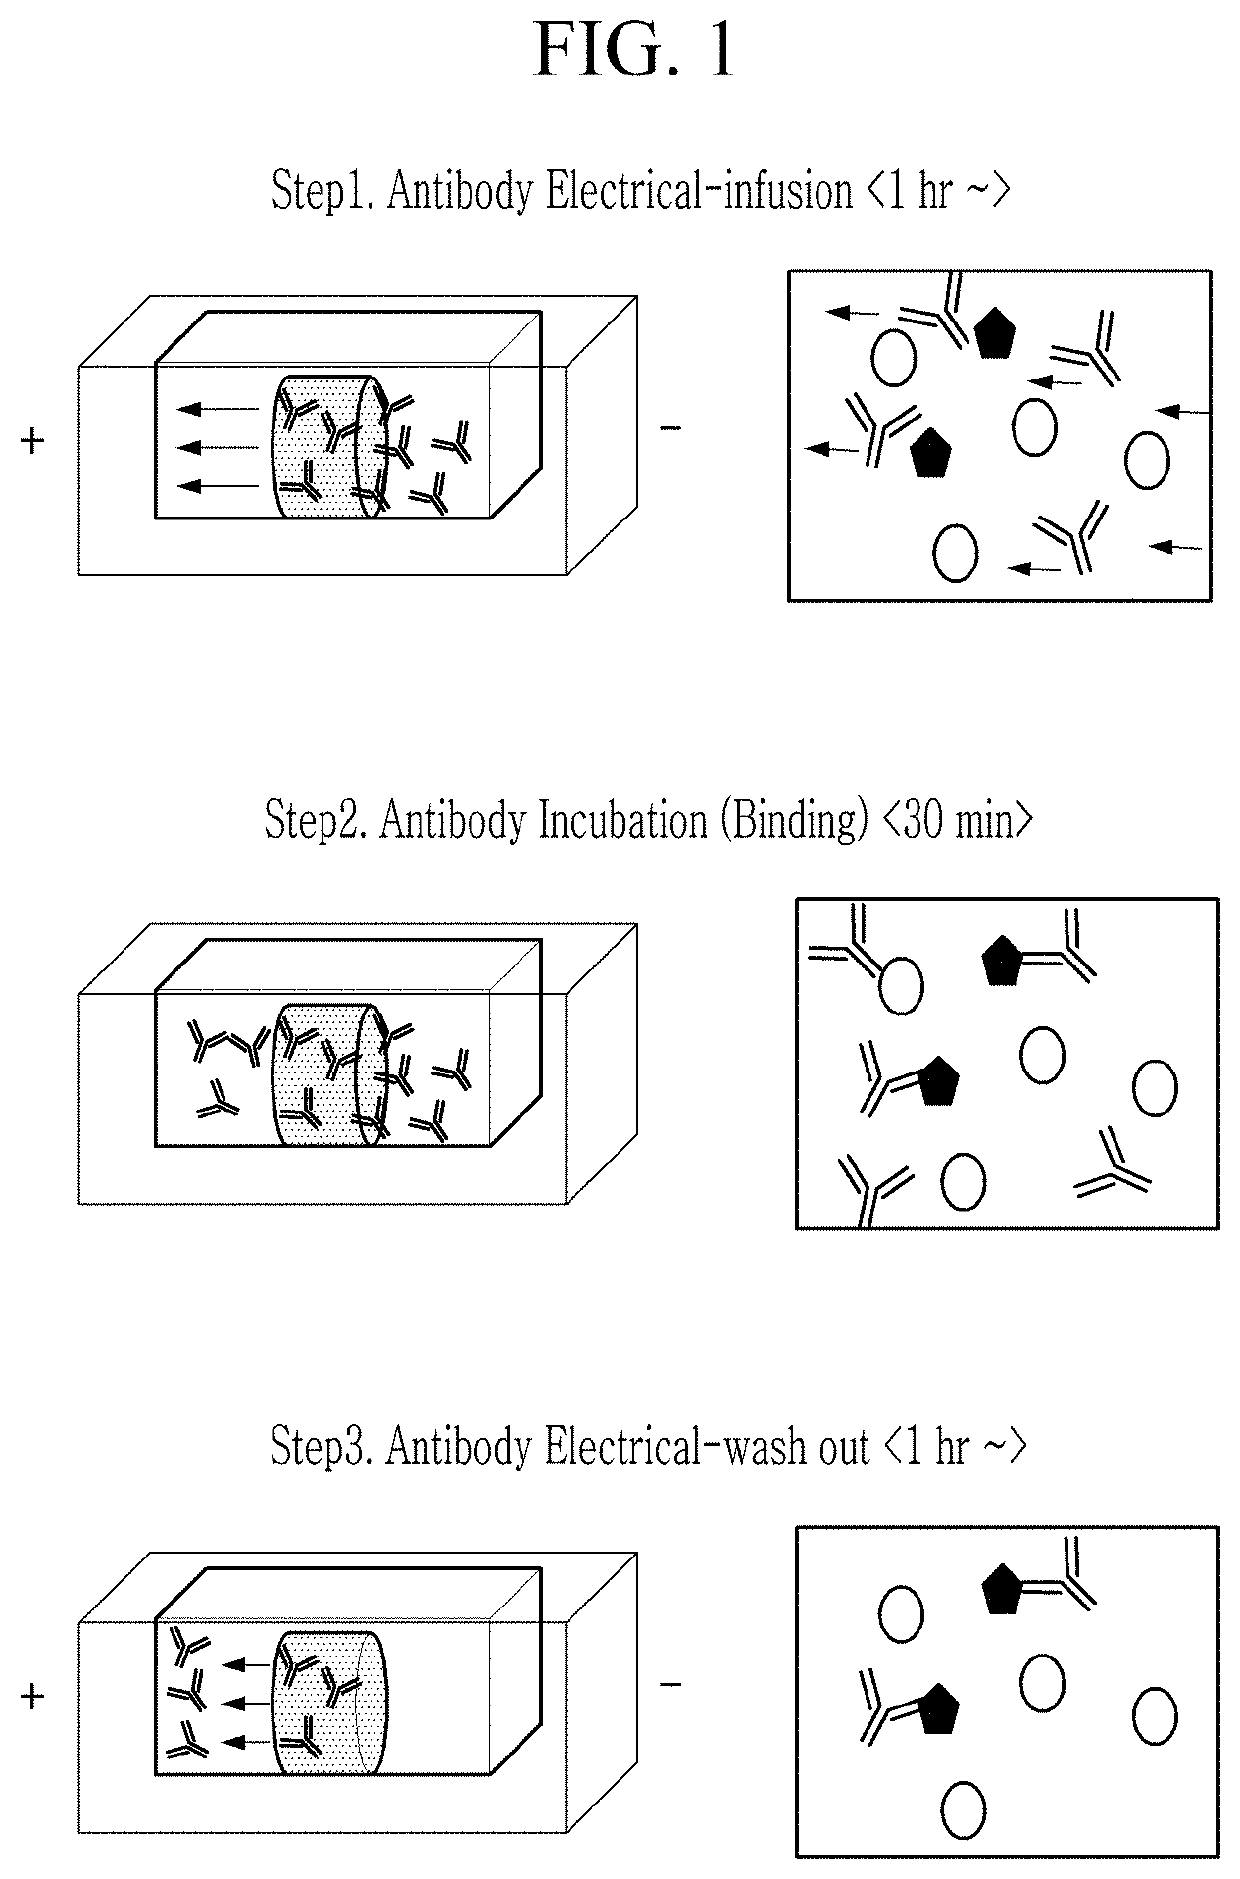 Electrophoretic biological sample staining method and staining apparatus using